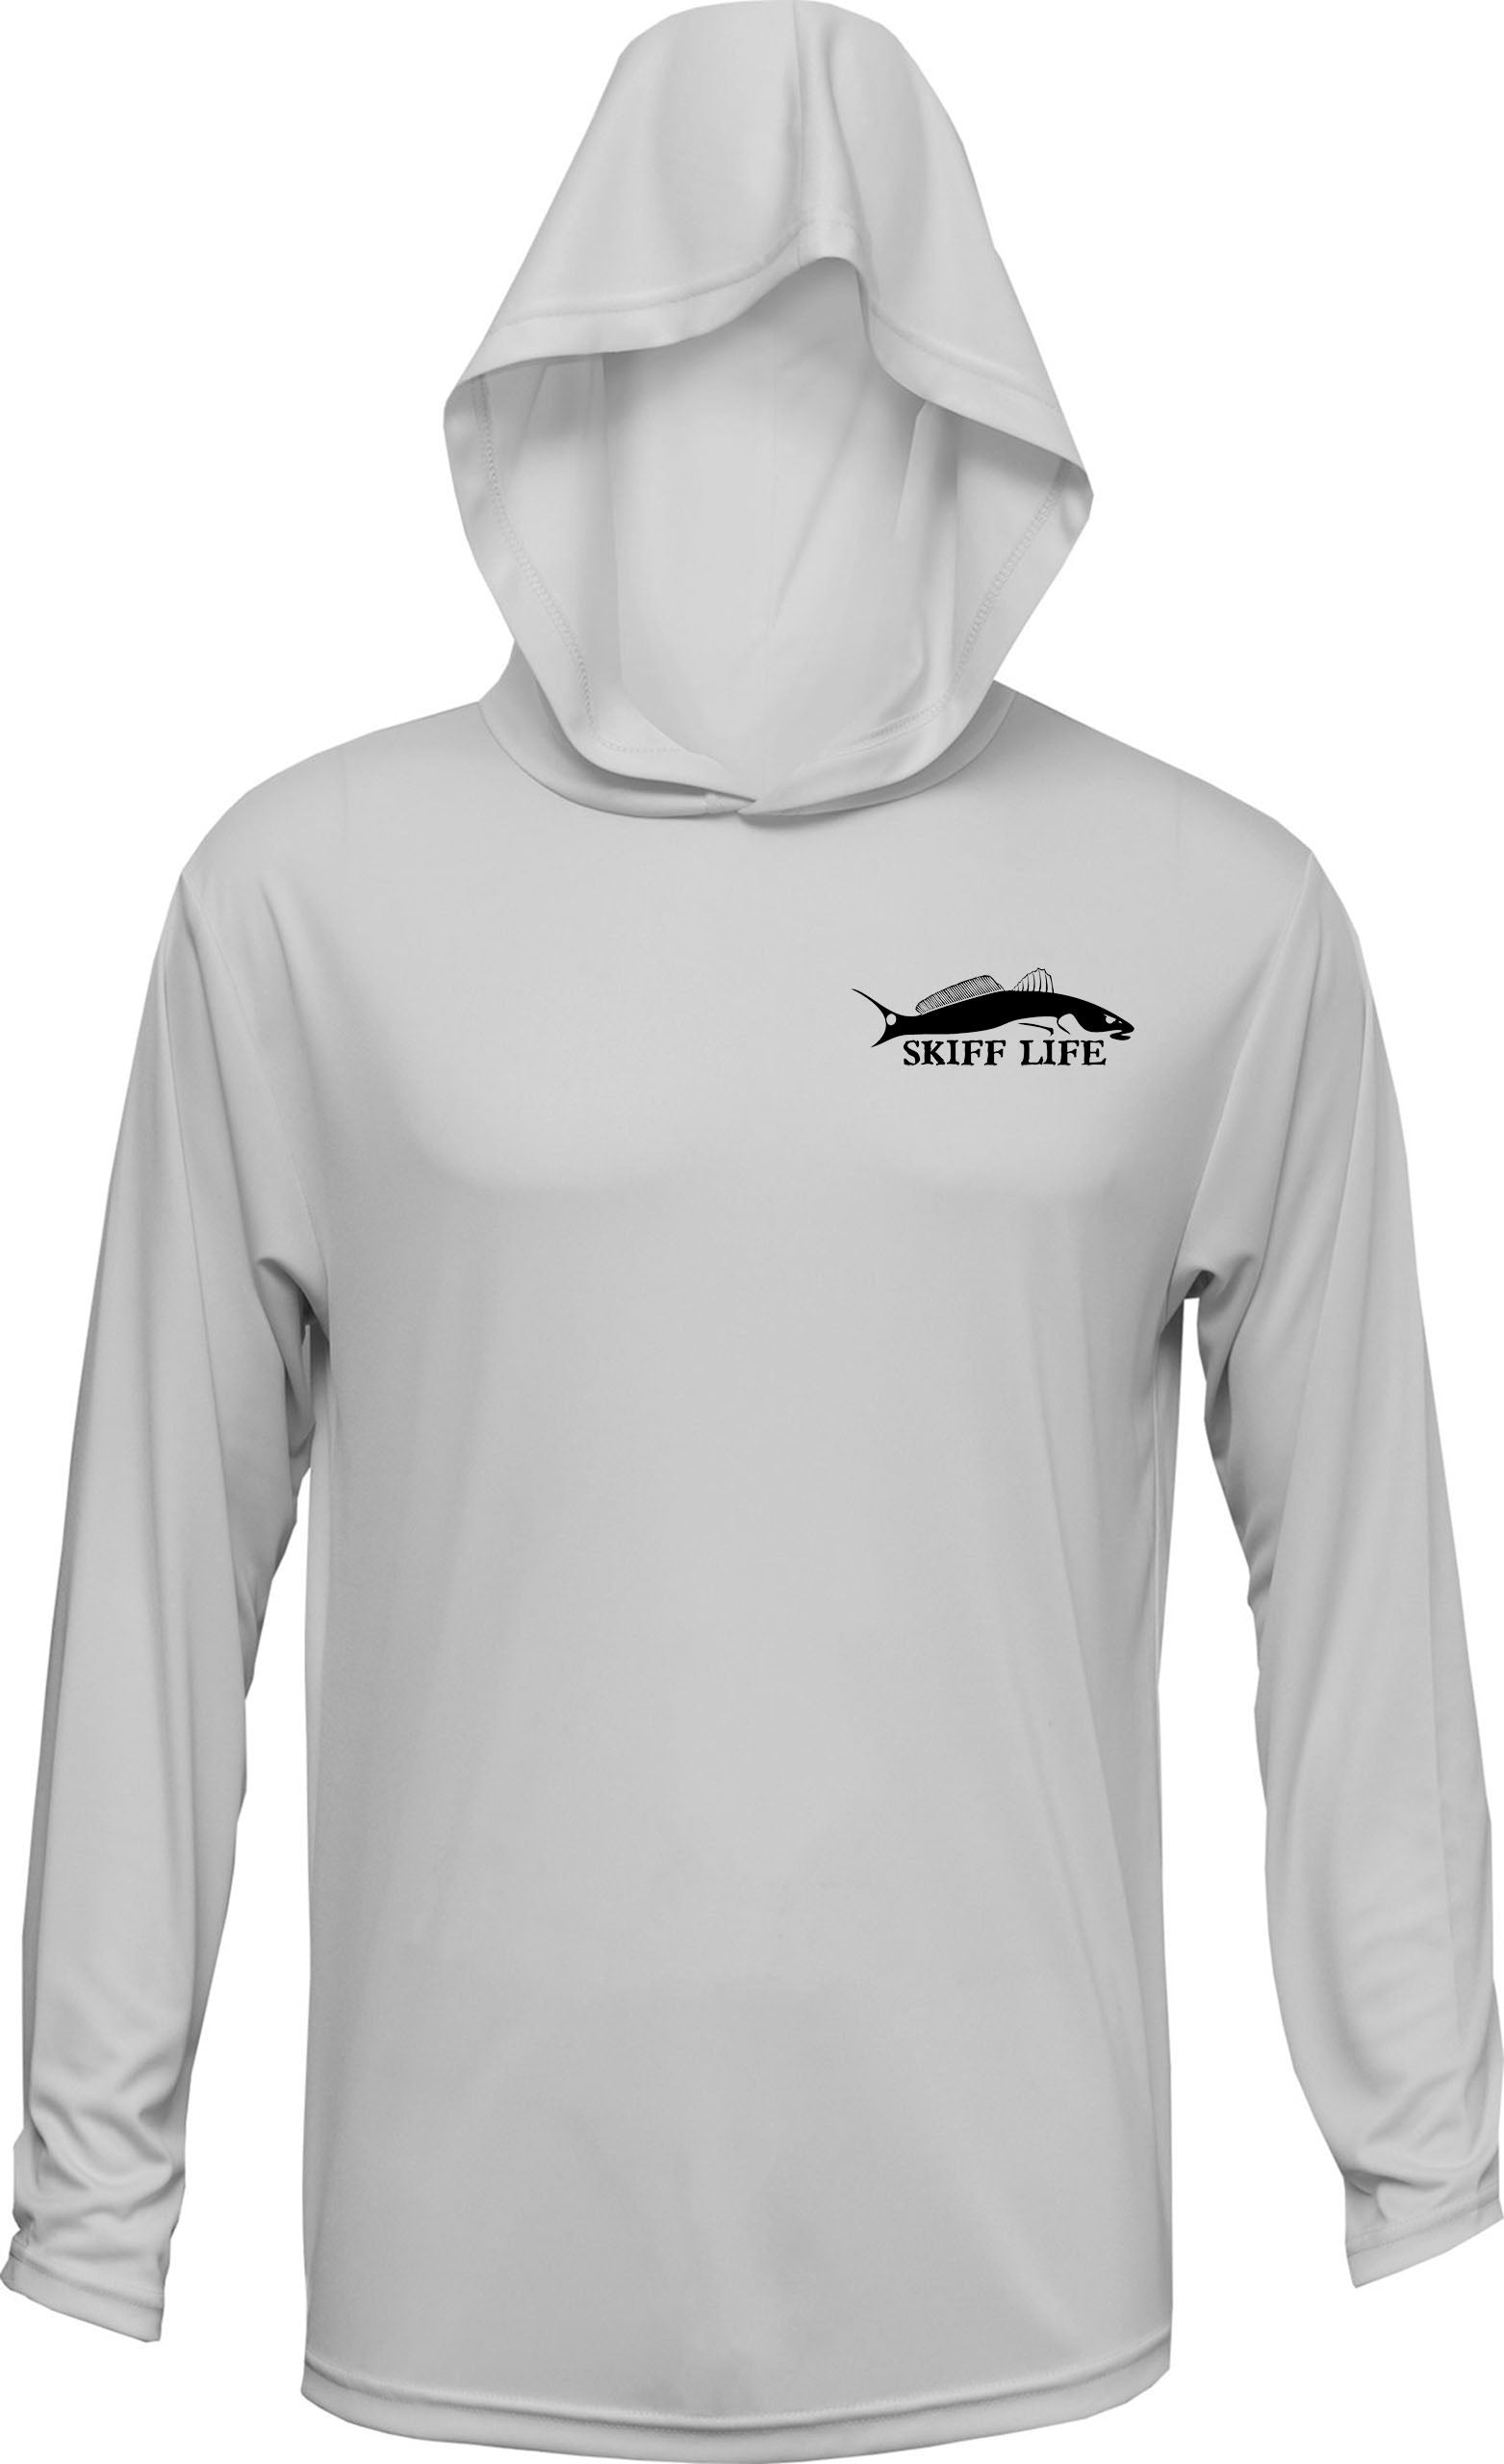 Spotted Sea Trout Fishing Hoodie Optional Flag Sleeve Large / Seagrass